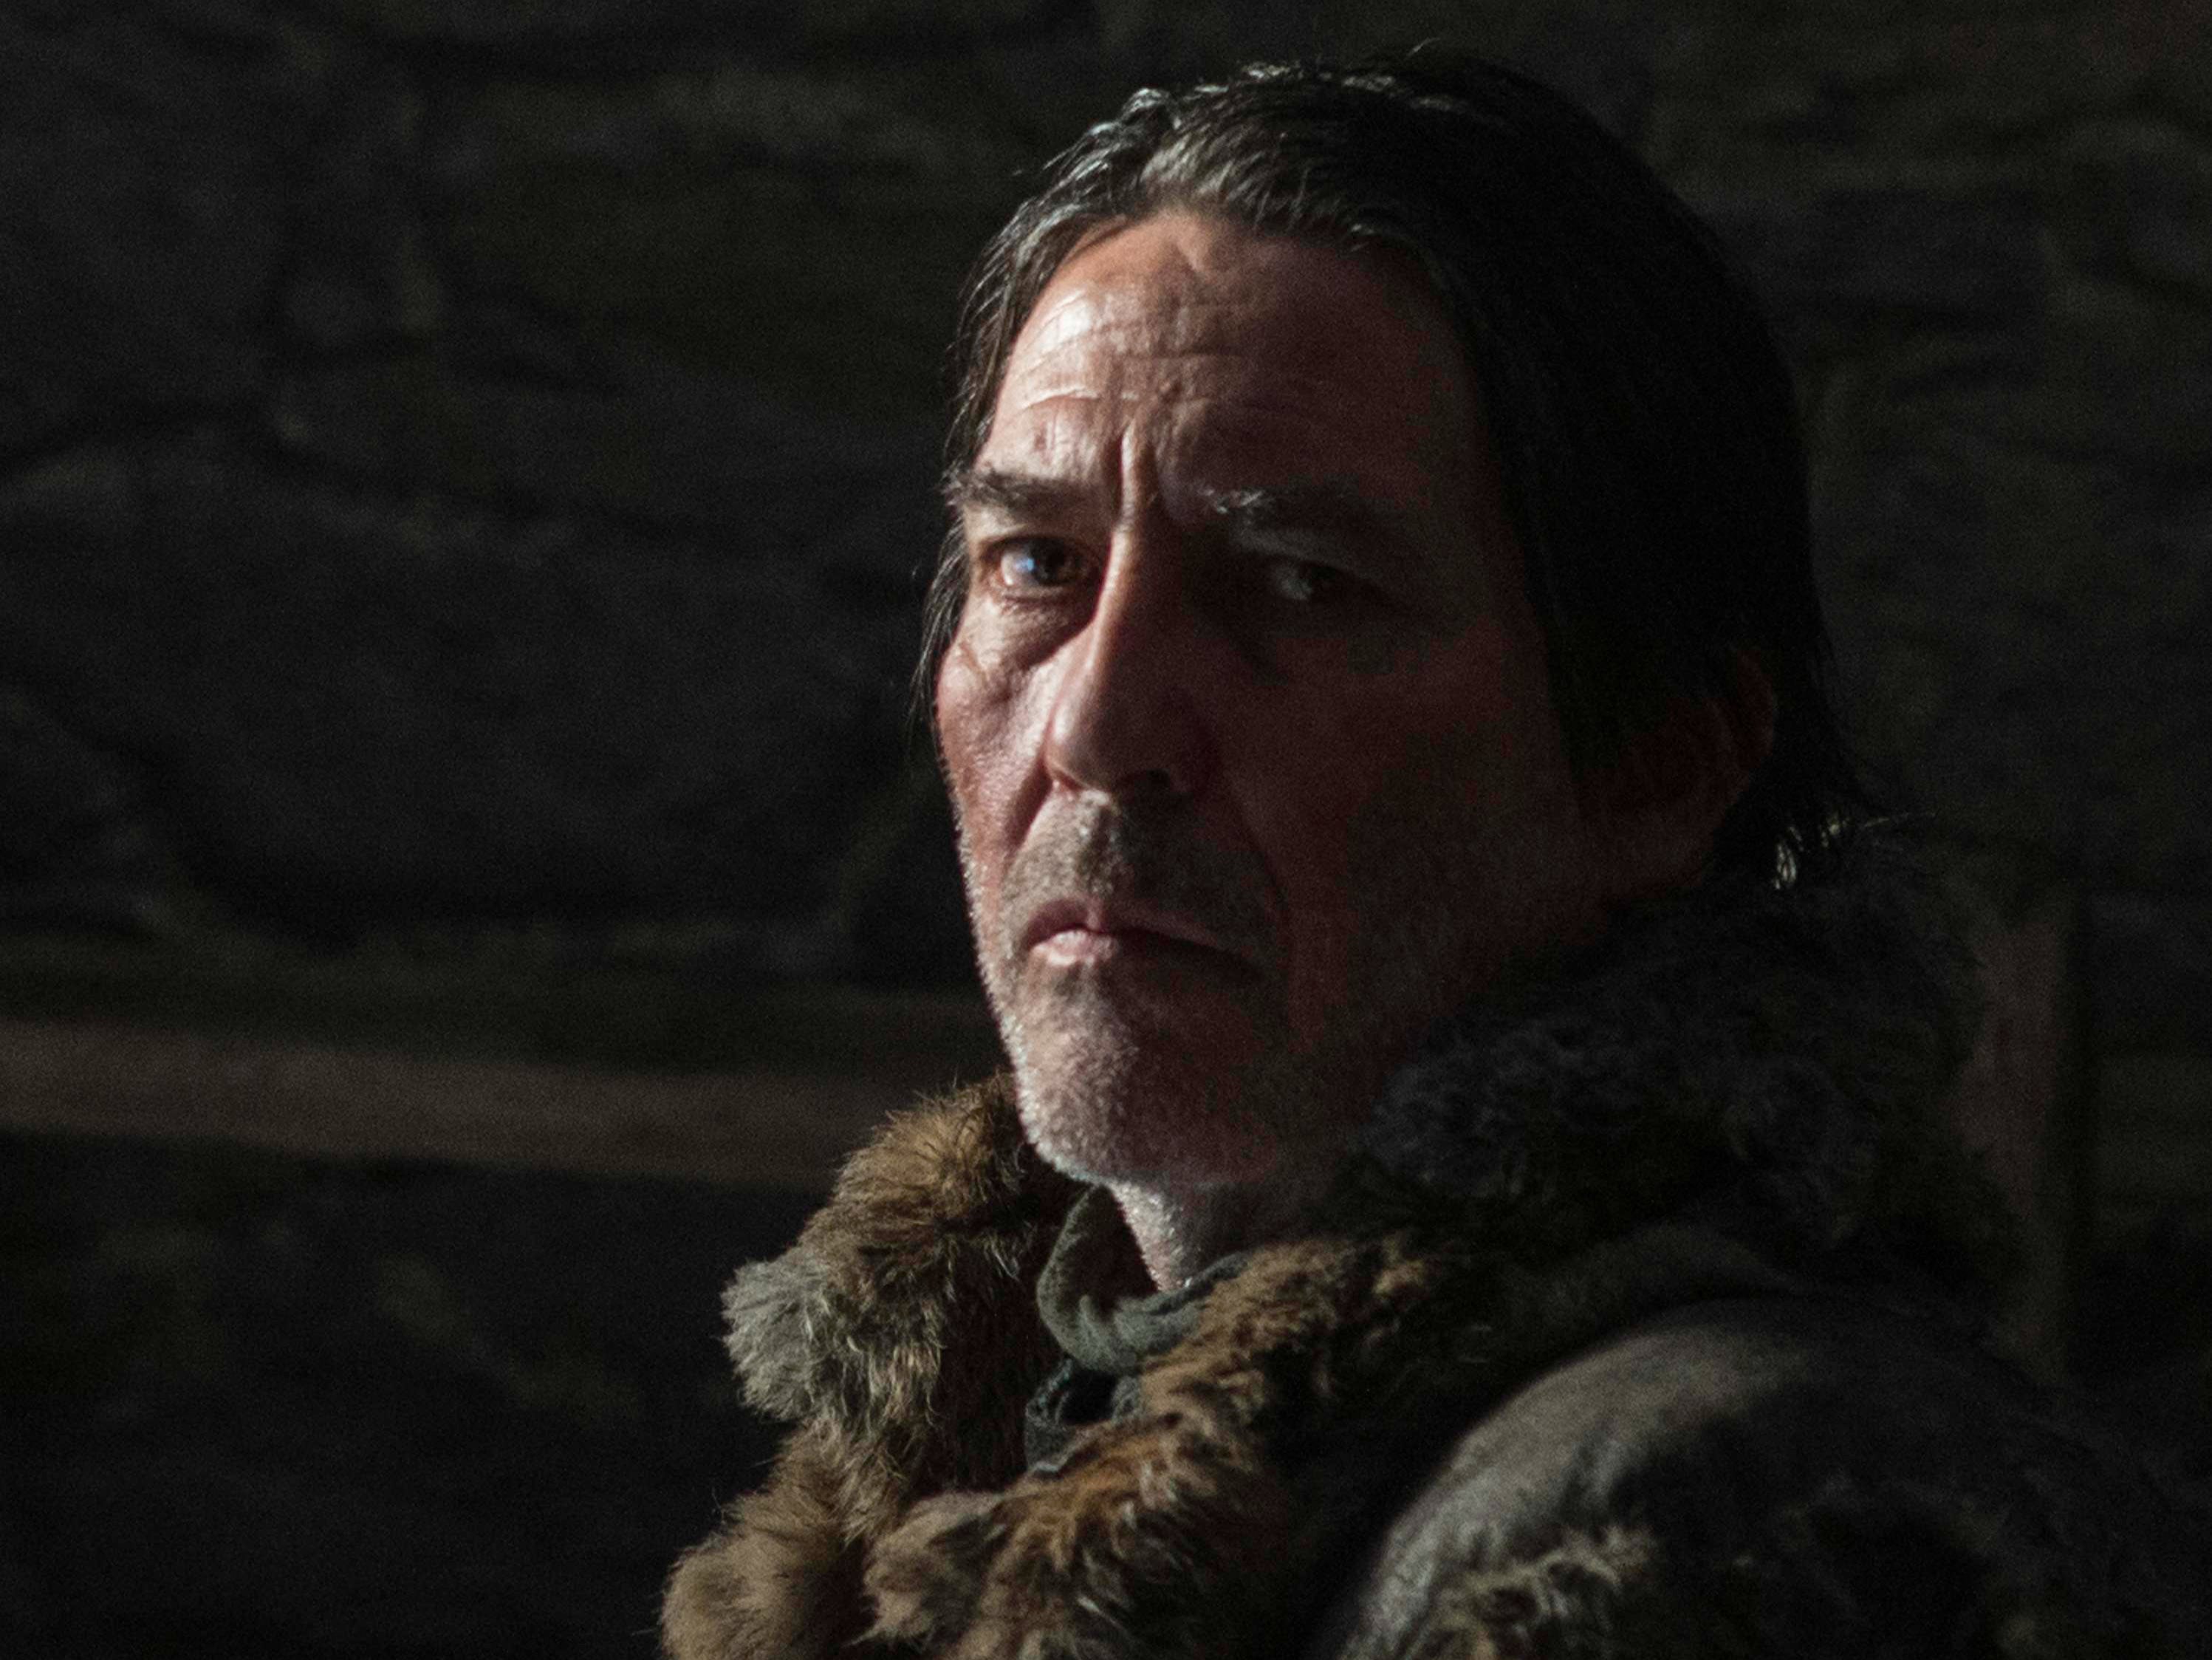 Hinds as Mance Rayder in ‘Game of Thrones'